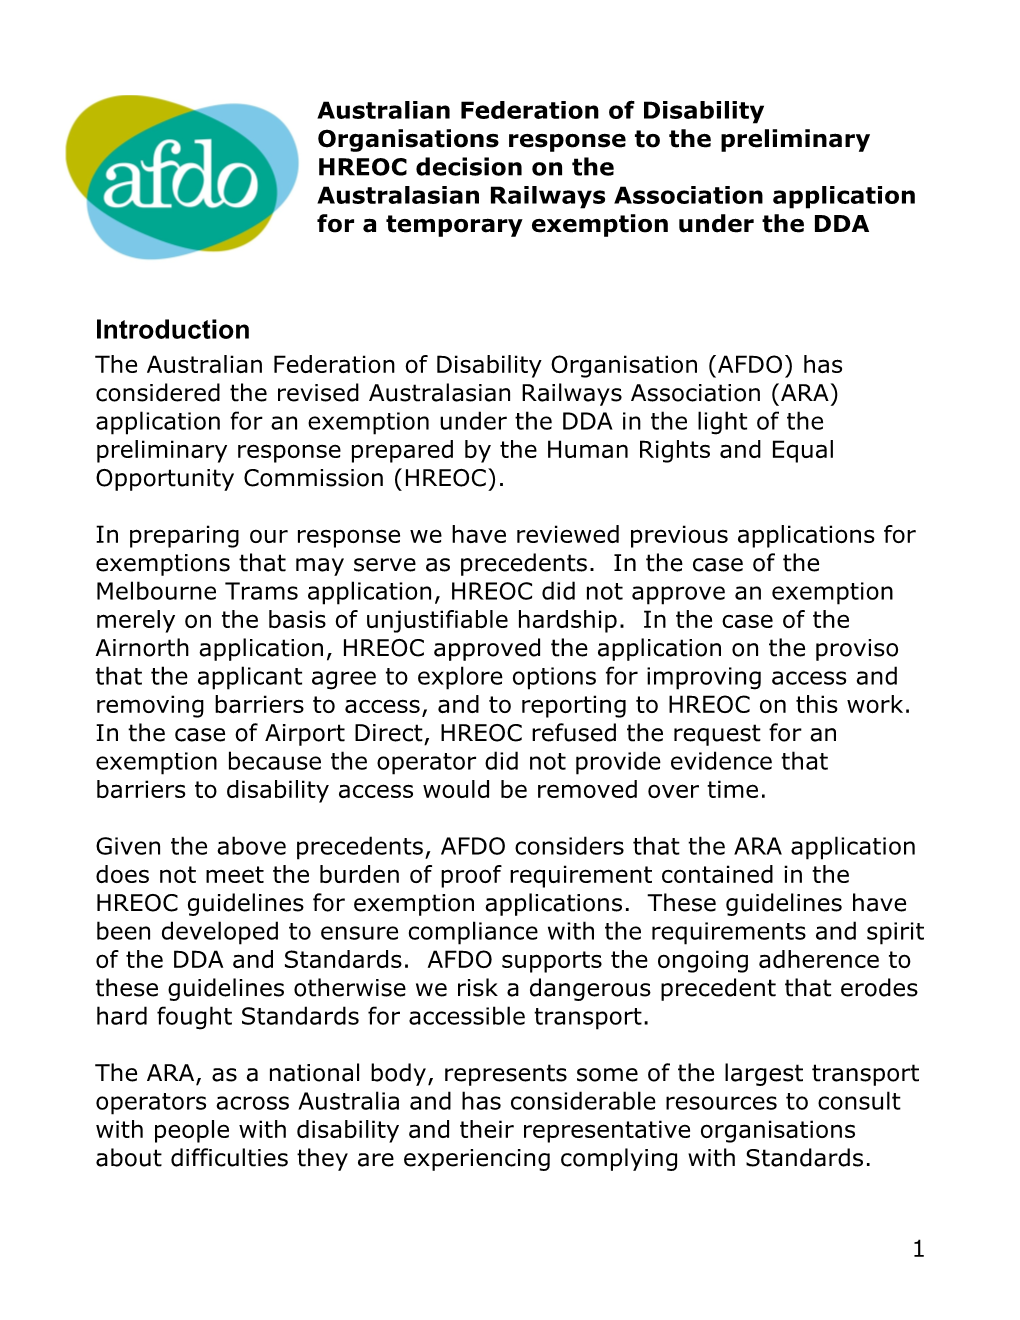 Australian Federation of Disability Organisations Response to the Preliminary HREOC Decision